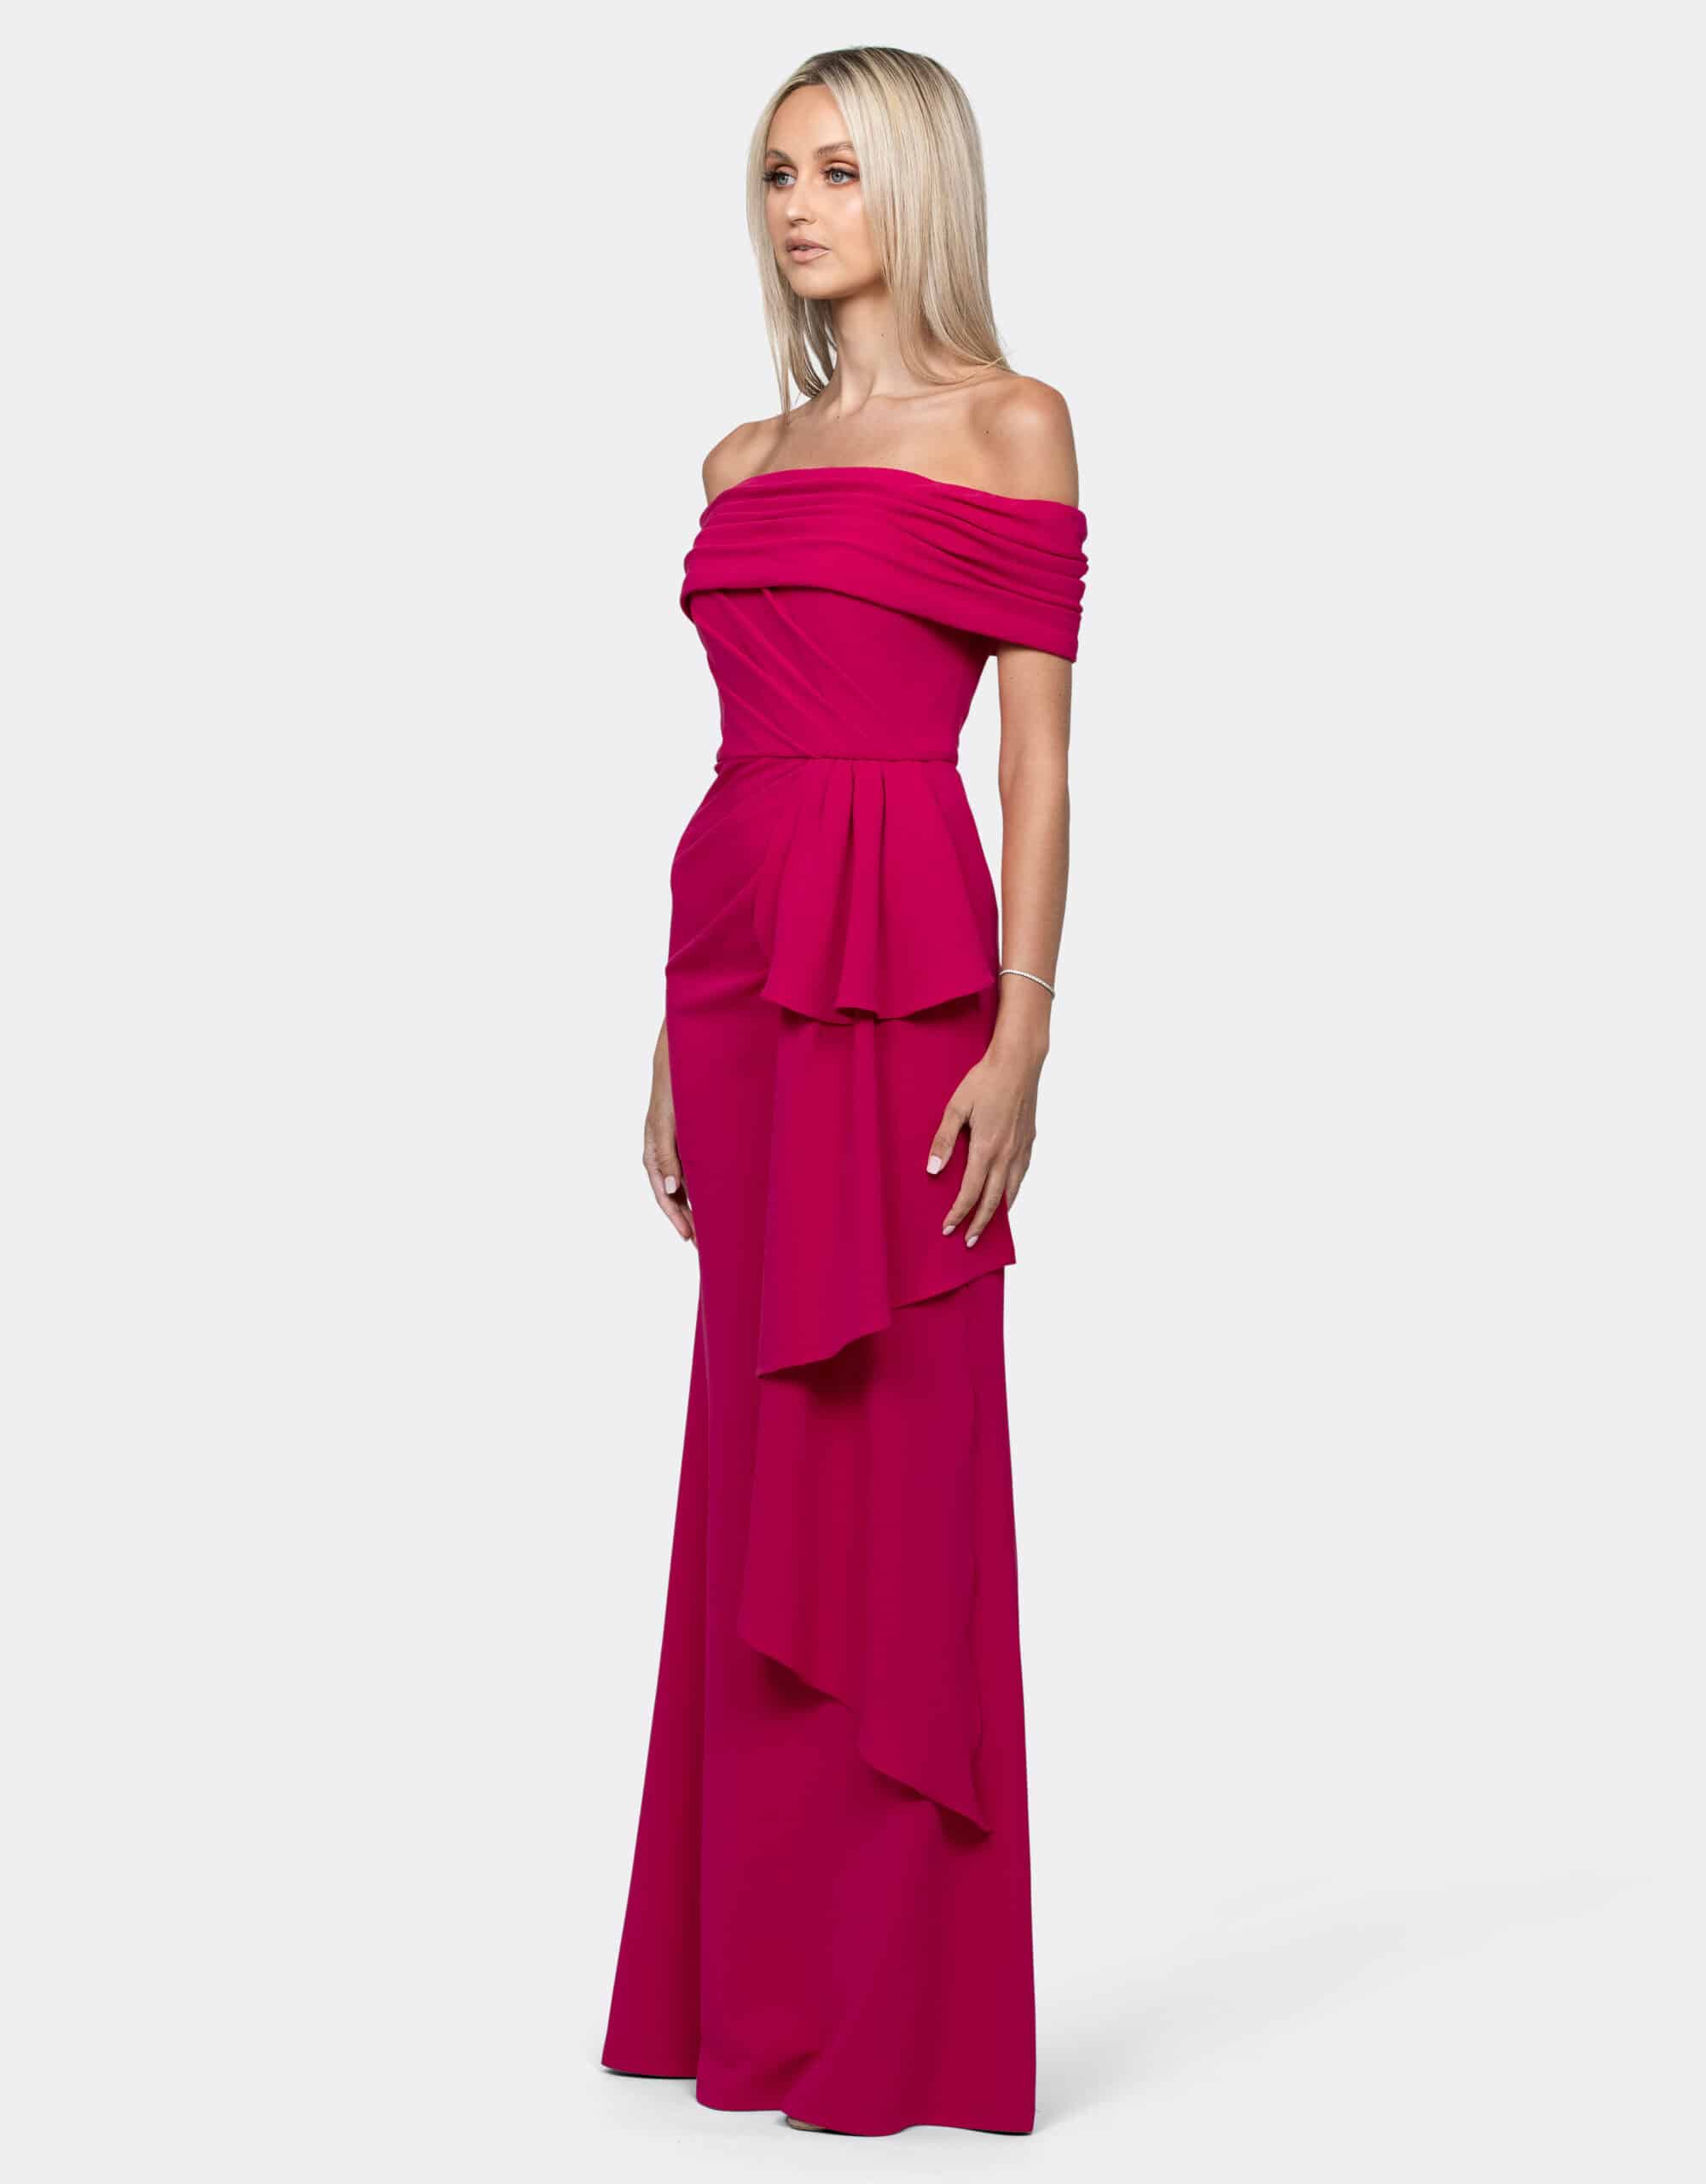 Off-Shoulder Fishtail Gown with Draped Overlay.JPG